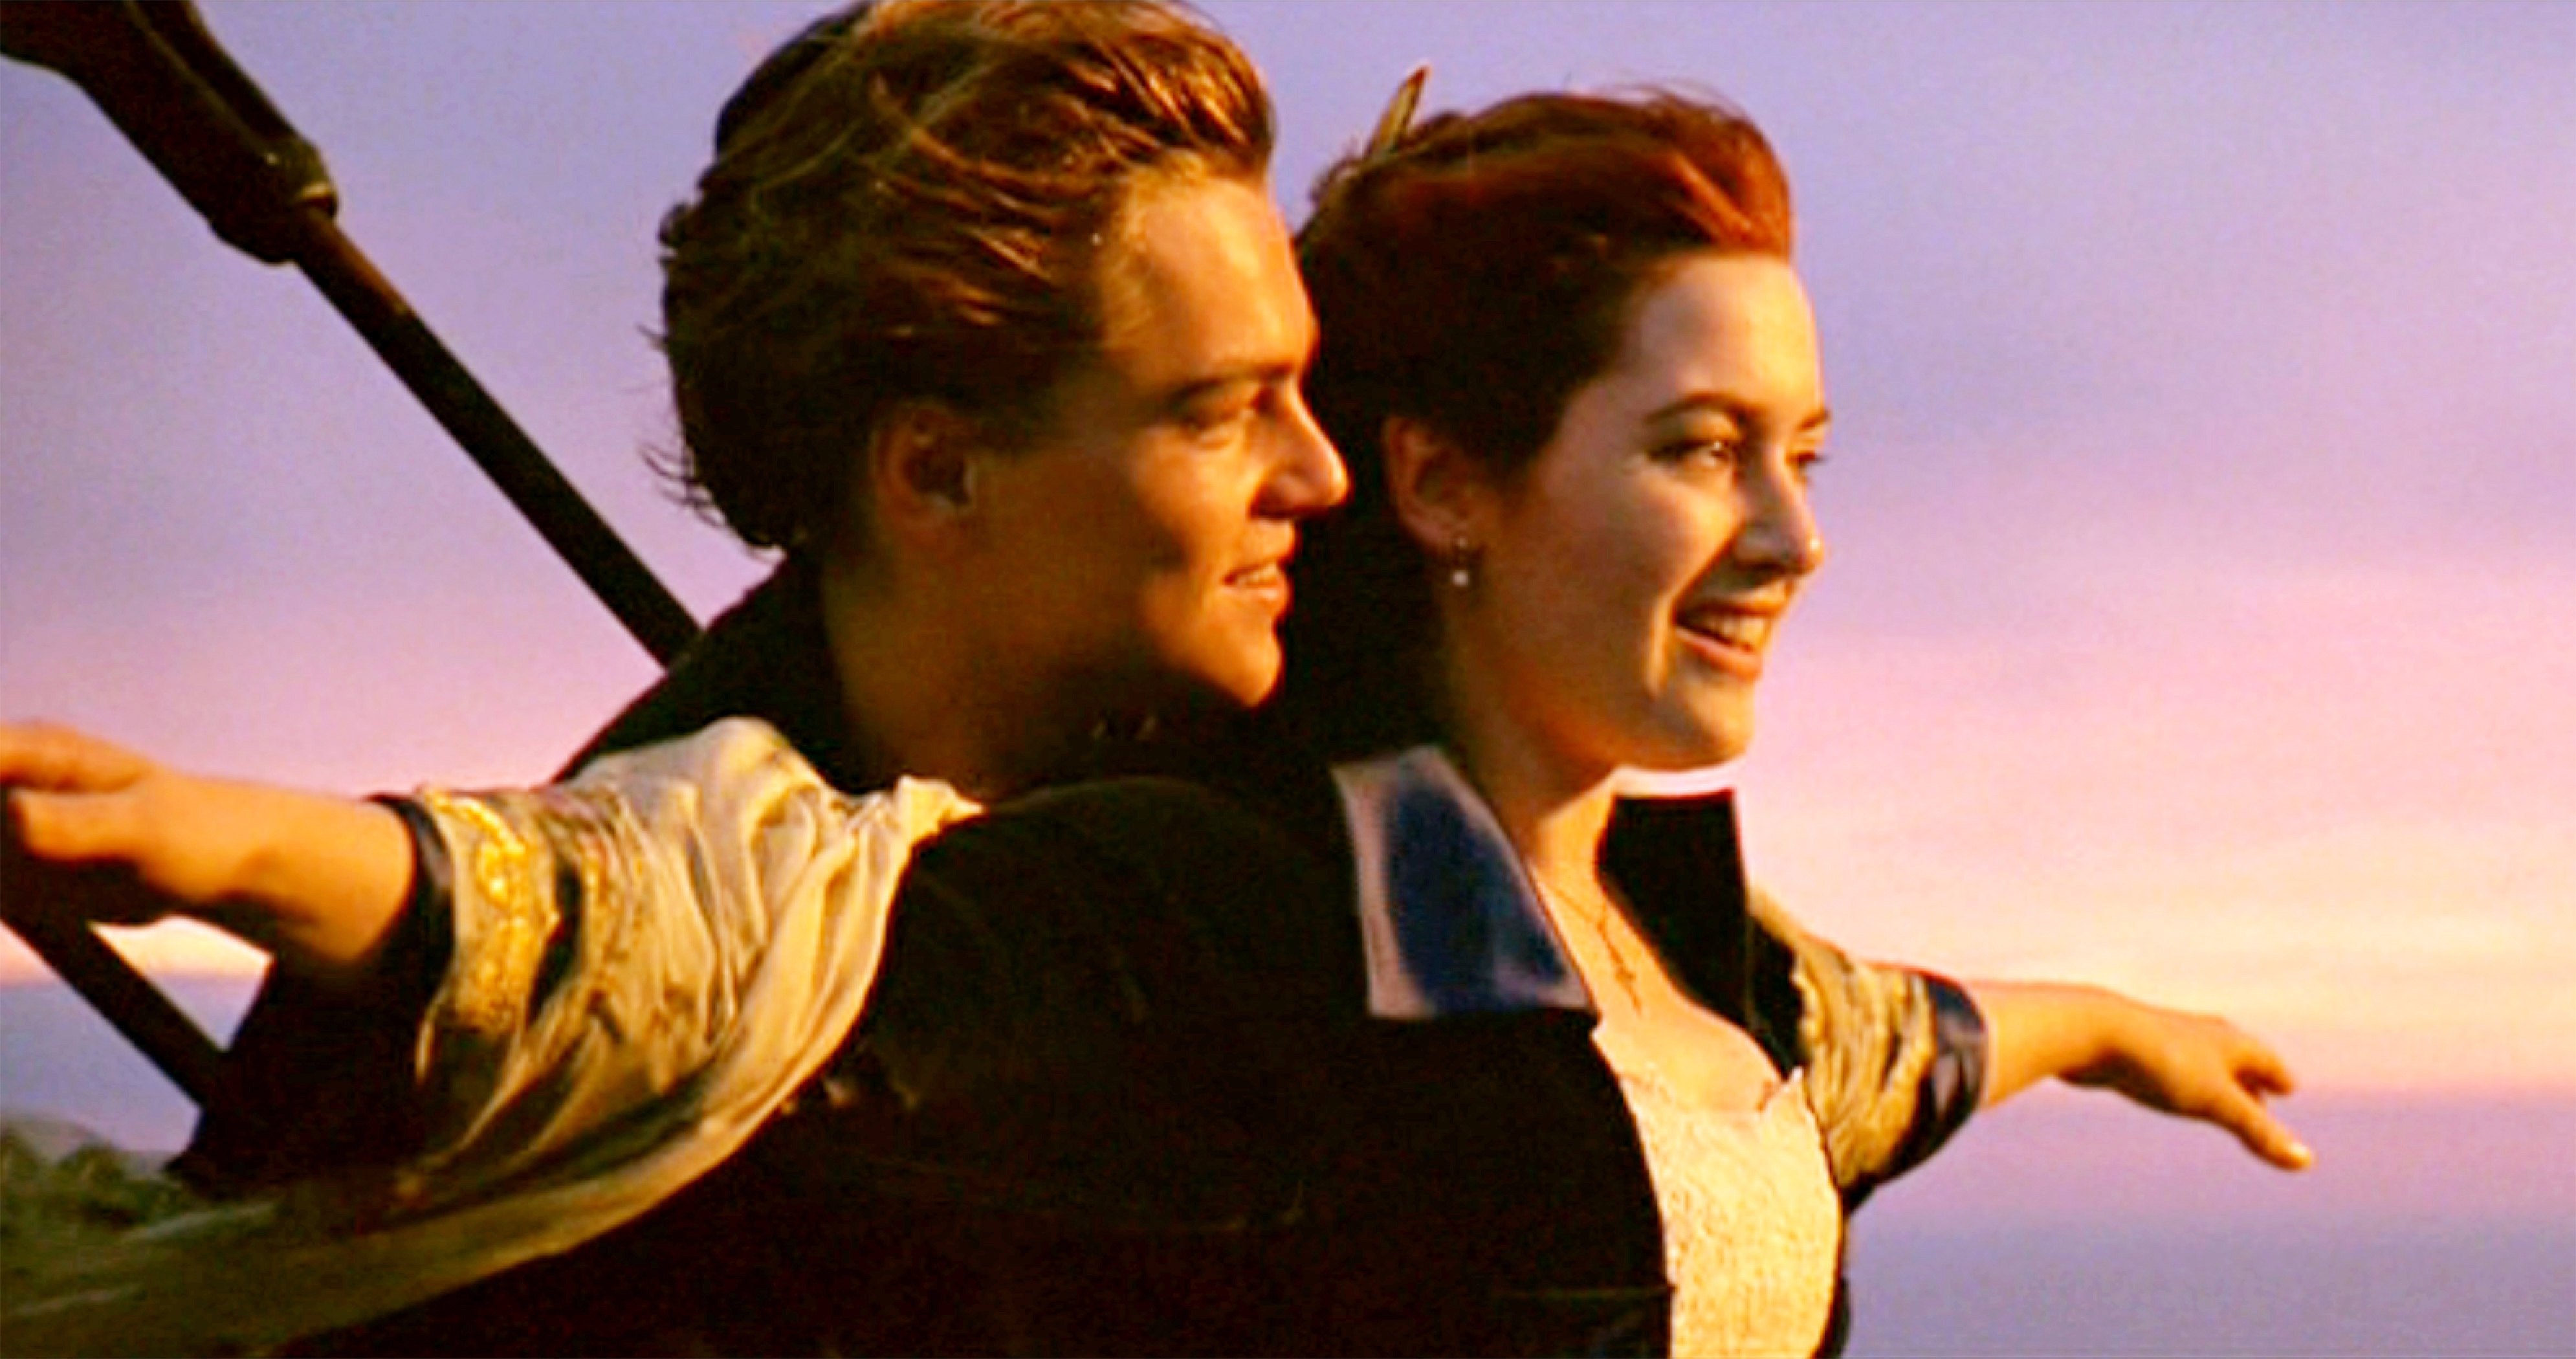 James Cameron’s 1997 epic film Titanic, starring Leonardo DiCaprio and Kate Winslet has been remastered for a special 4K edition. Photo: CBS via Getty Images